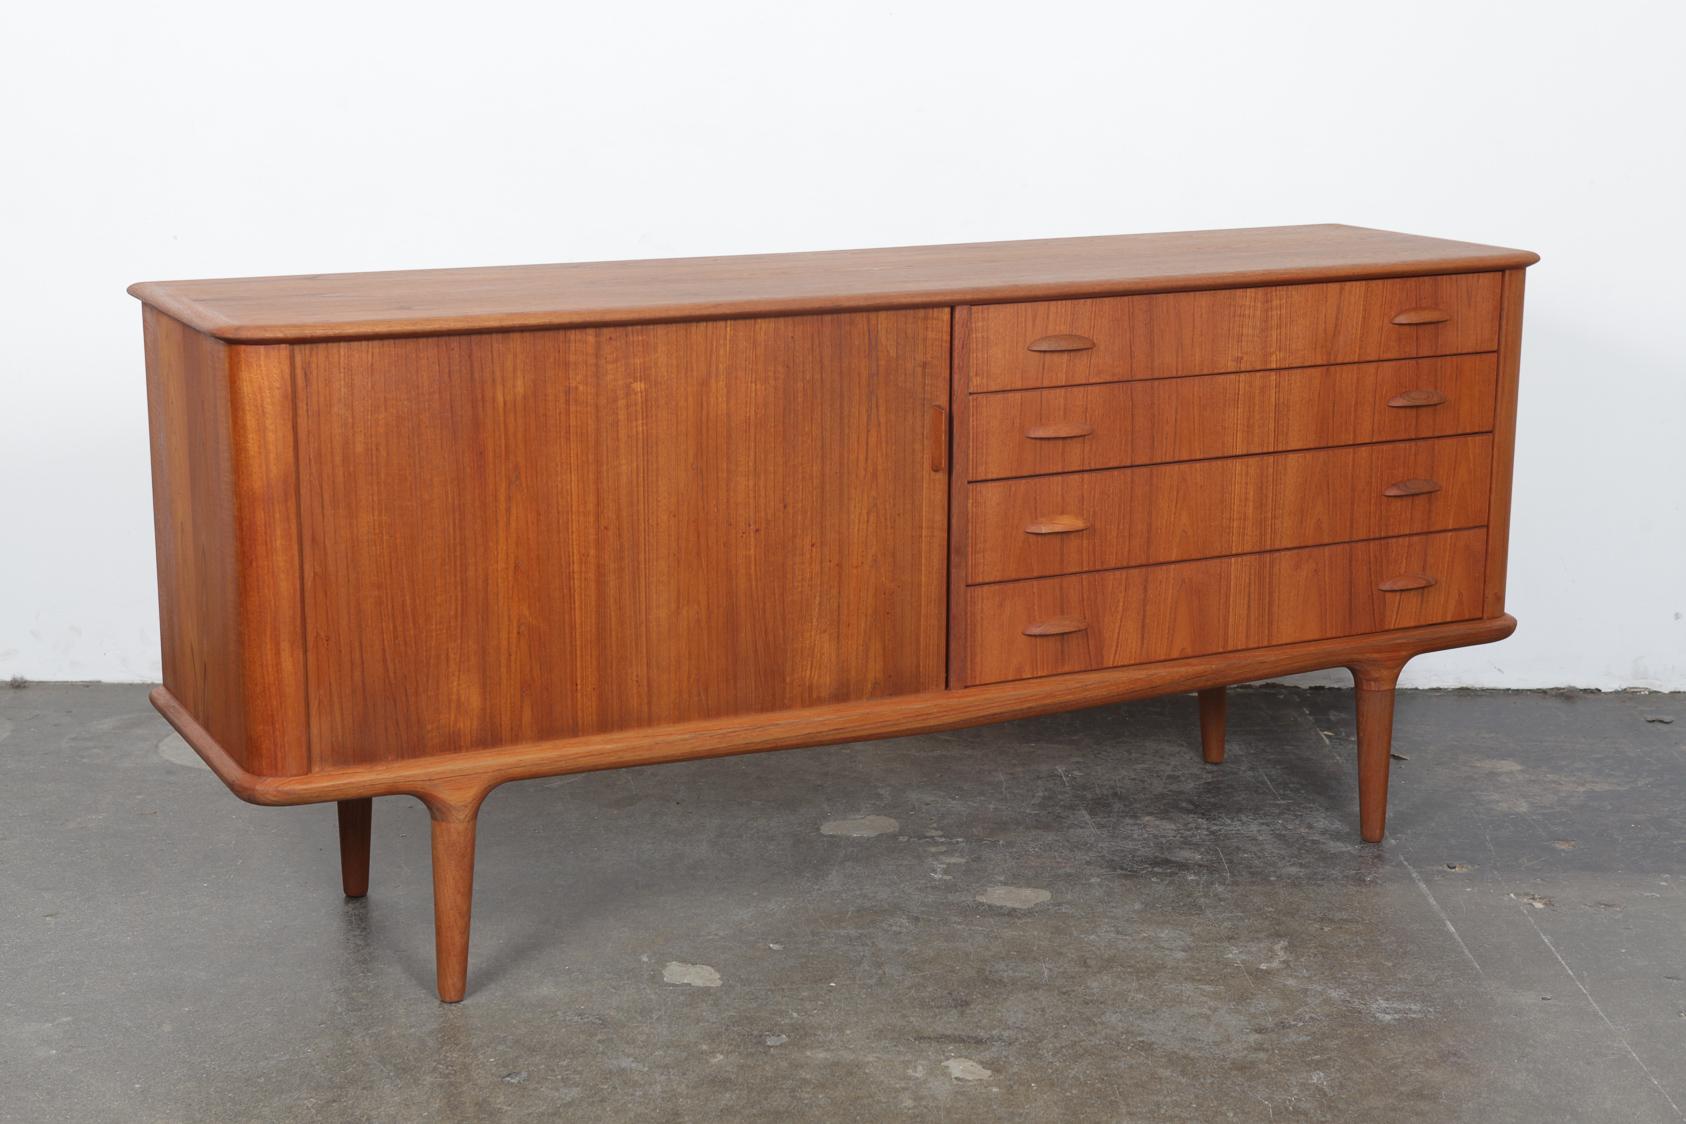 Newly refinished Danish Mid-Century Modern beautiful teak tambour door sideboard with four drawers and a rounded front and side edge on solid teak tapering legs. Drawers have half shell-style pulls. Designer made I'm not just sure of who the